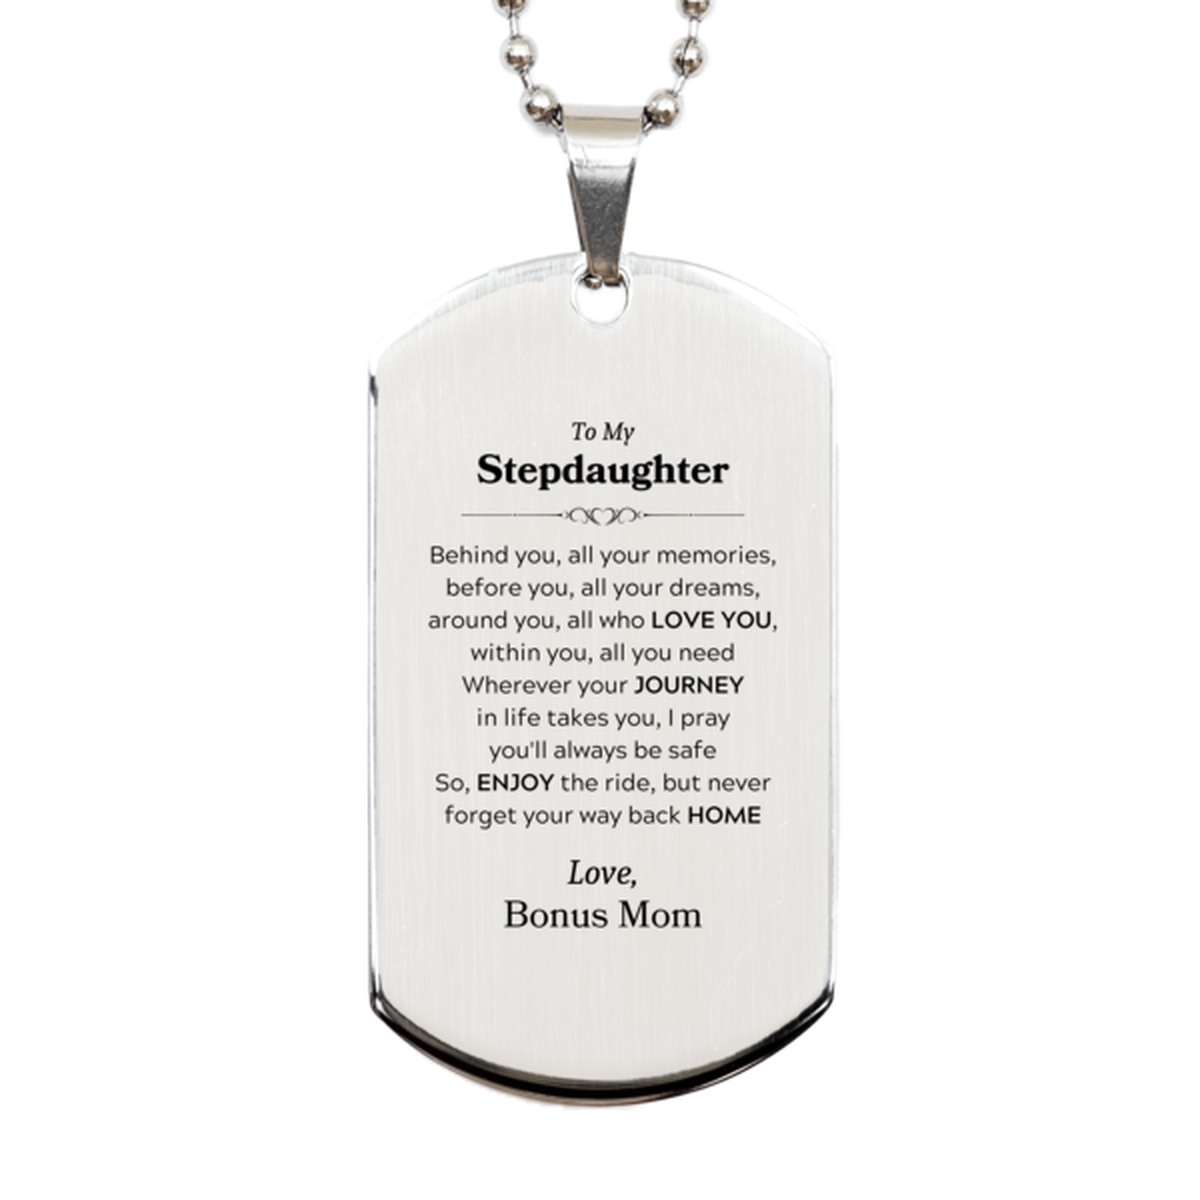 To My Stepdaughter Graduation Gifts from Bonus Mom, Stepdaughter Silver Dog Tag Christmas Birthday Gifts for Stepdaughter Behind you, all your memories, before you, all your dreams. Love, Bonus Mom